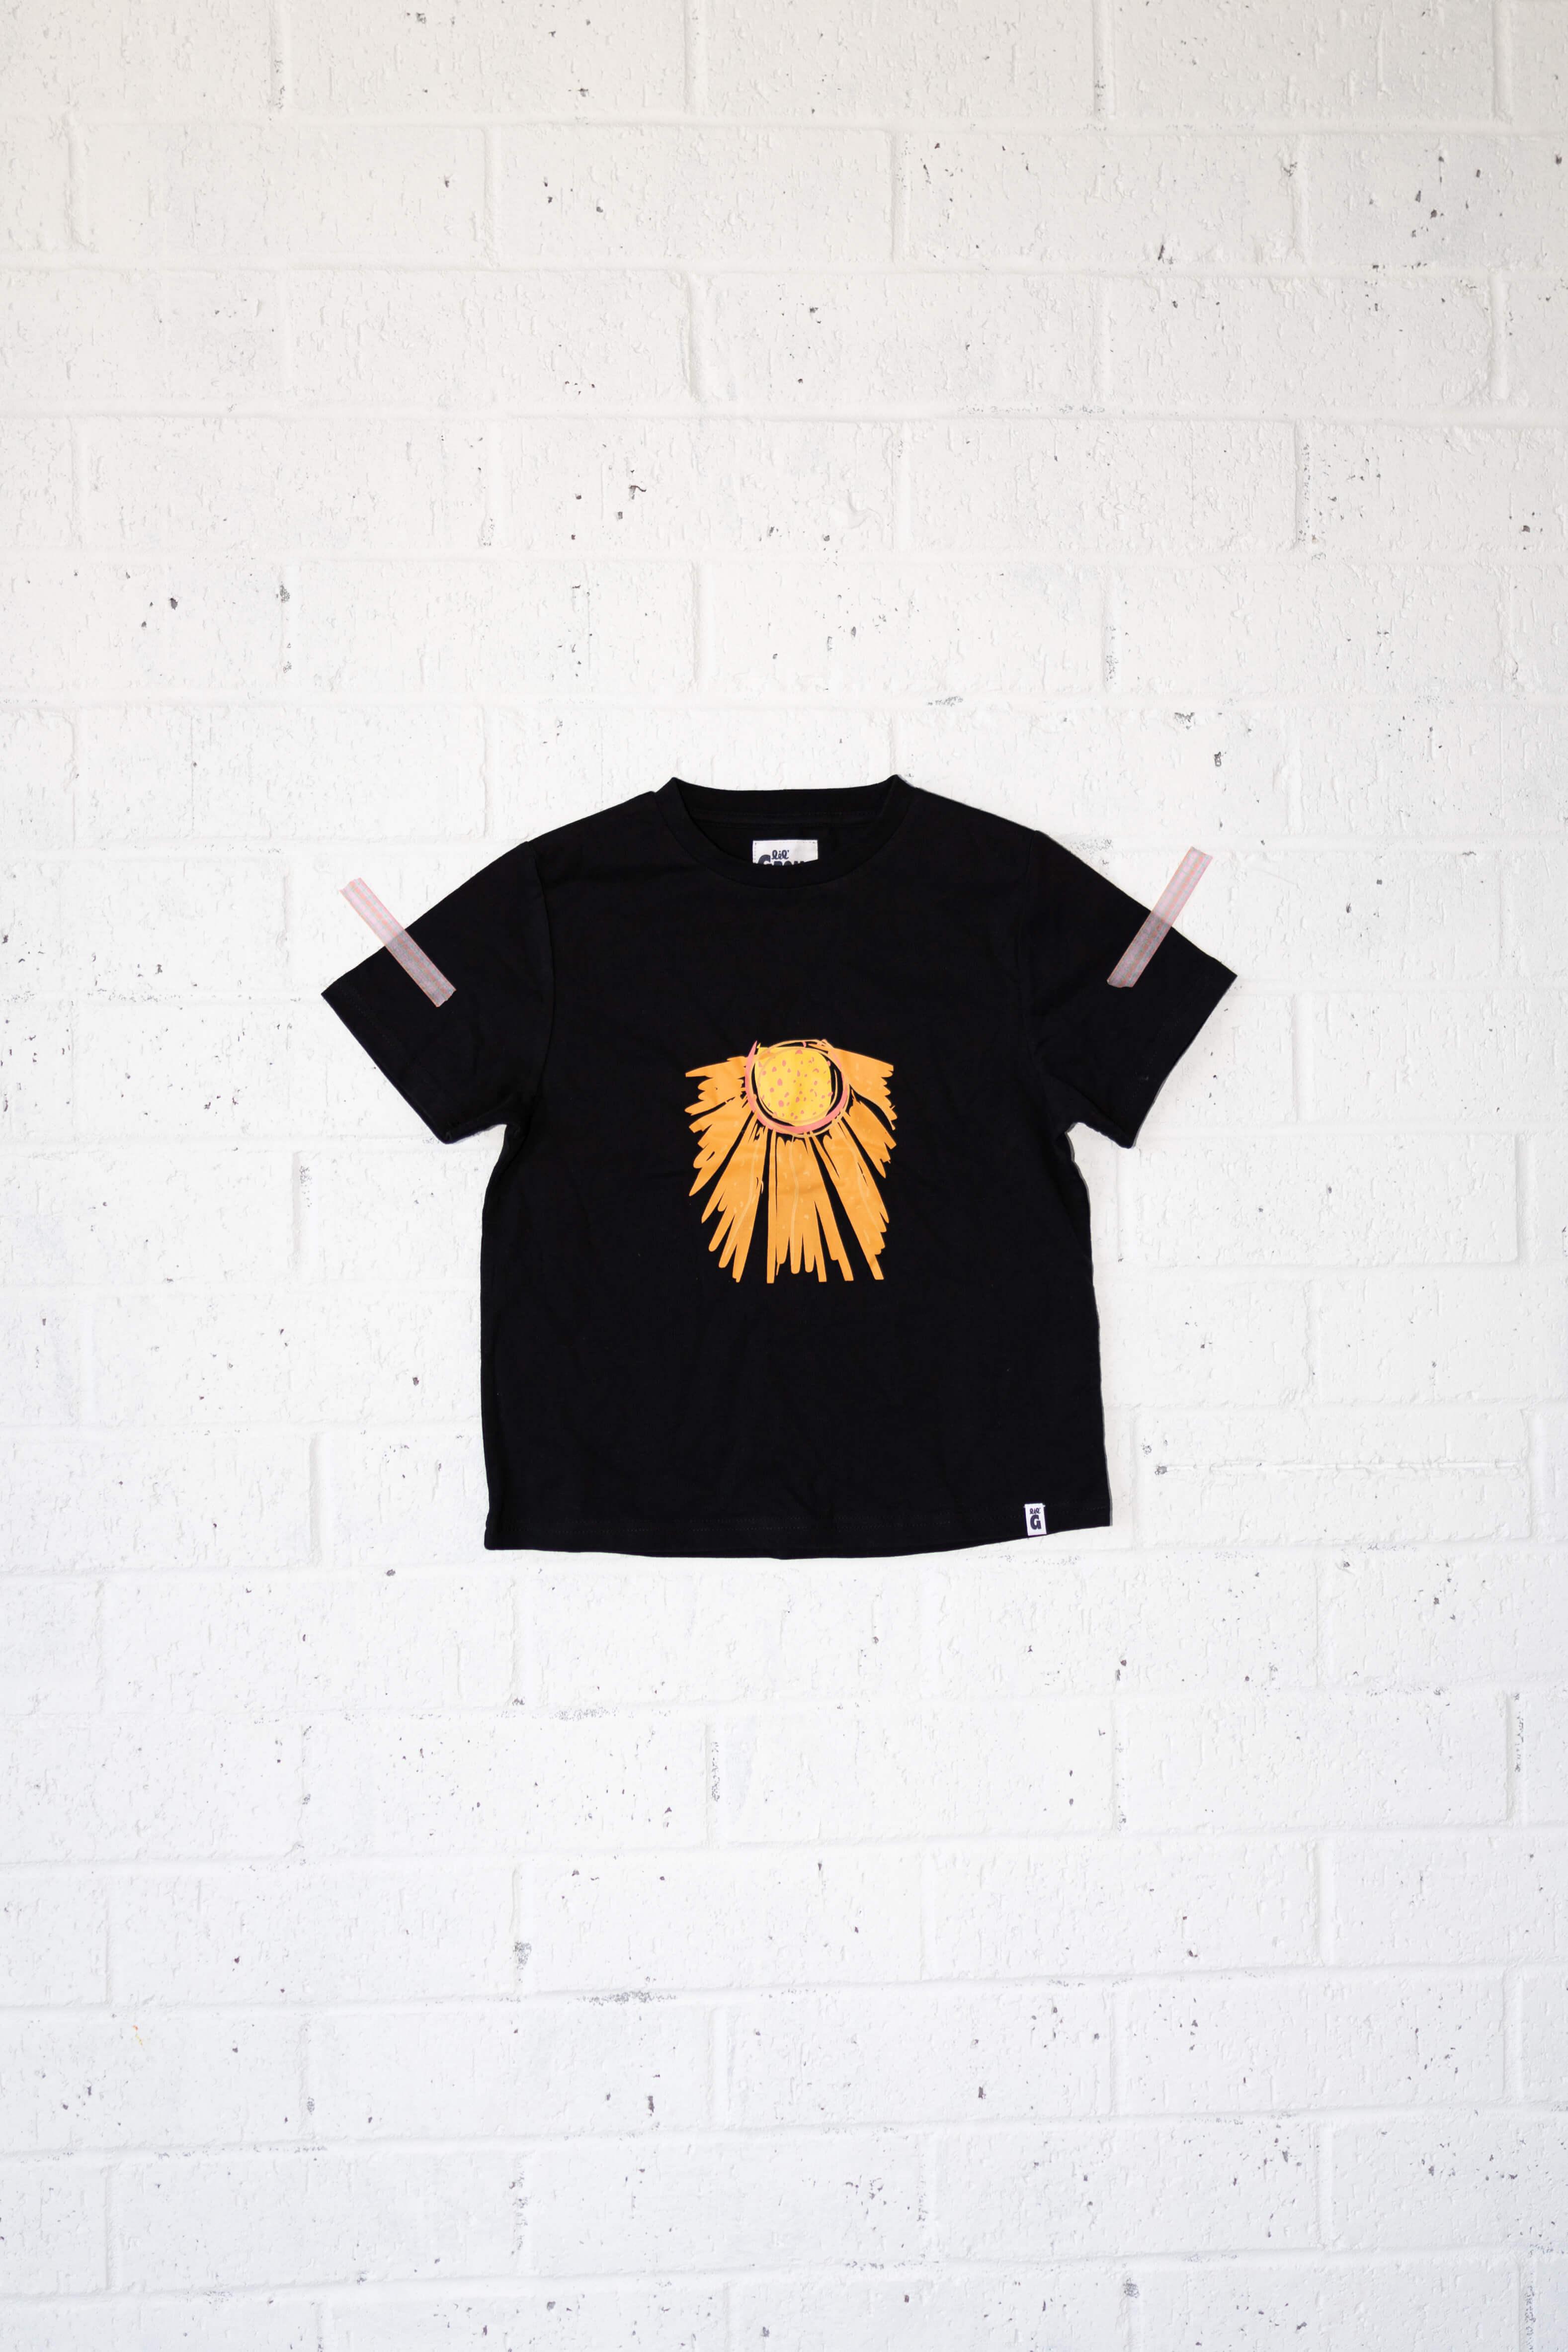 sunshine and the weather is fine tee - Lil Groms Kids Co